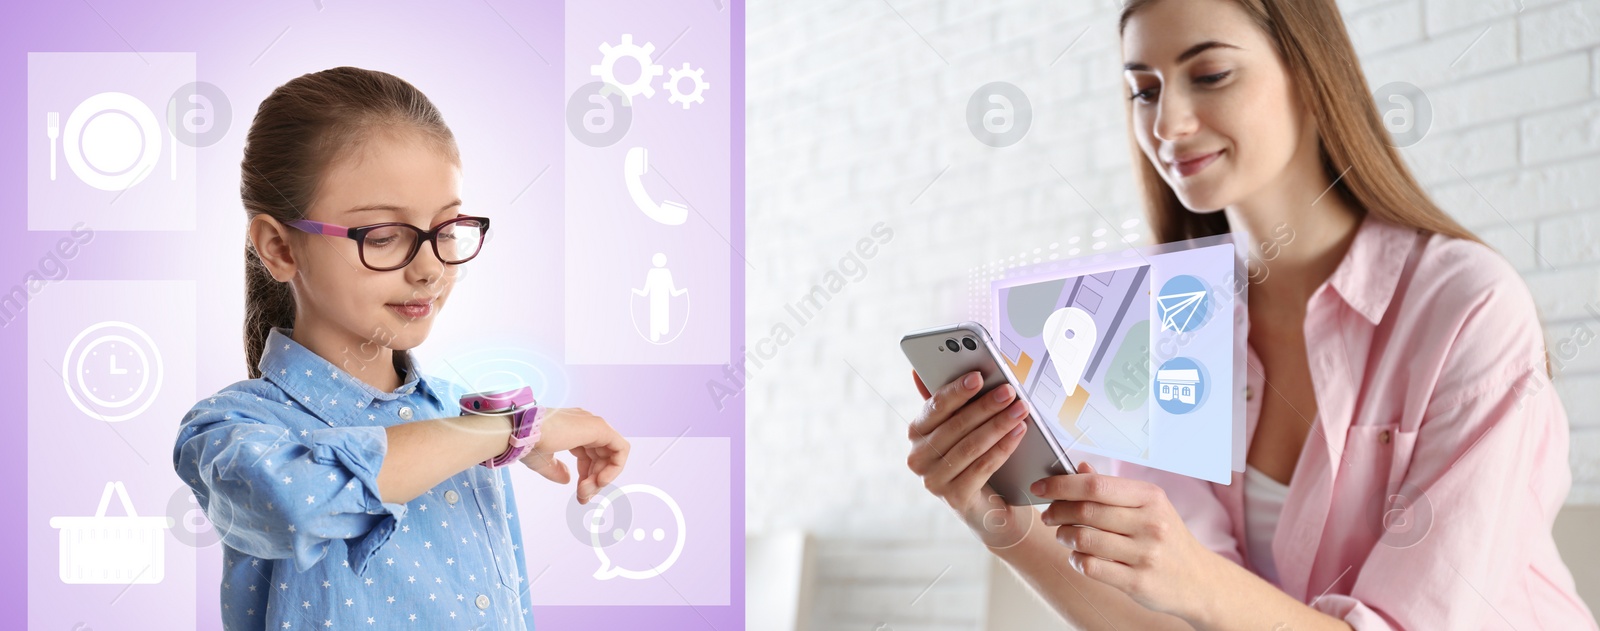 Image of Control kid's geolocation via smart watch. Mother and daughter with gadgets, collage 